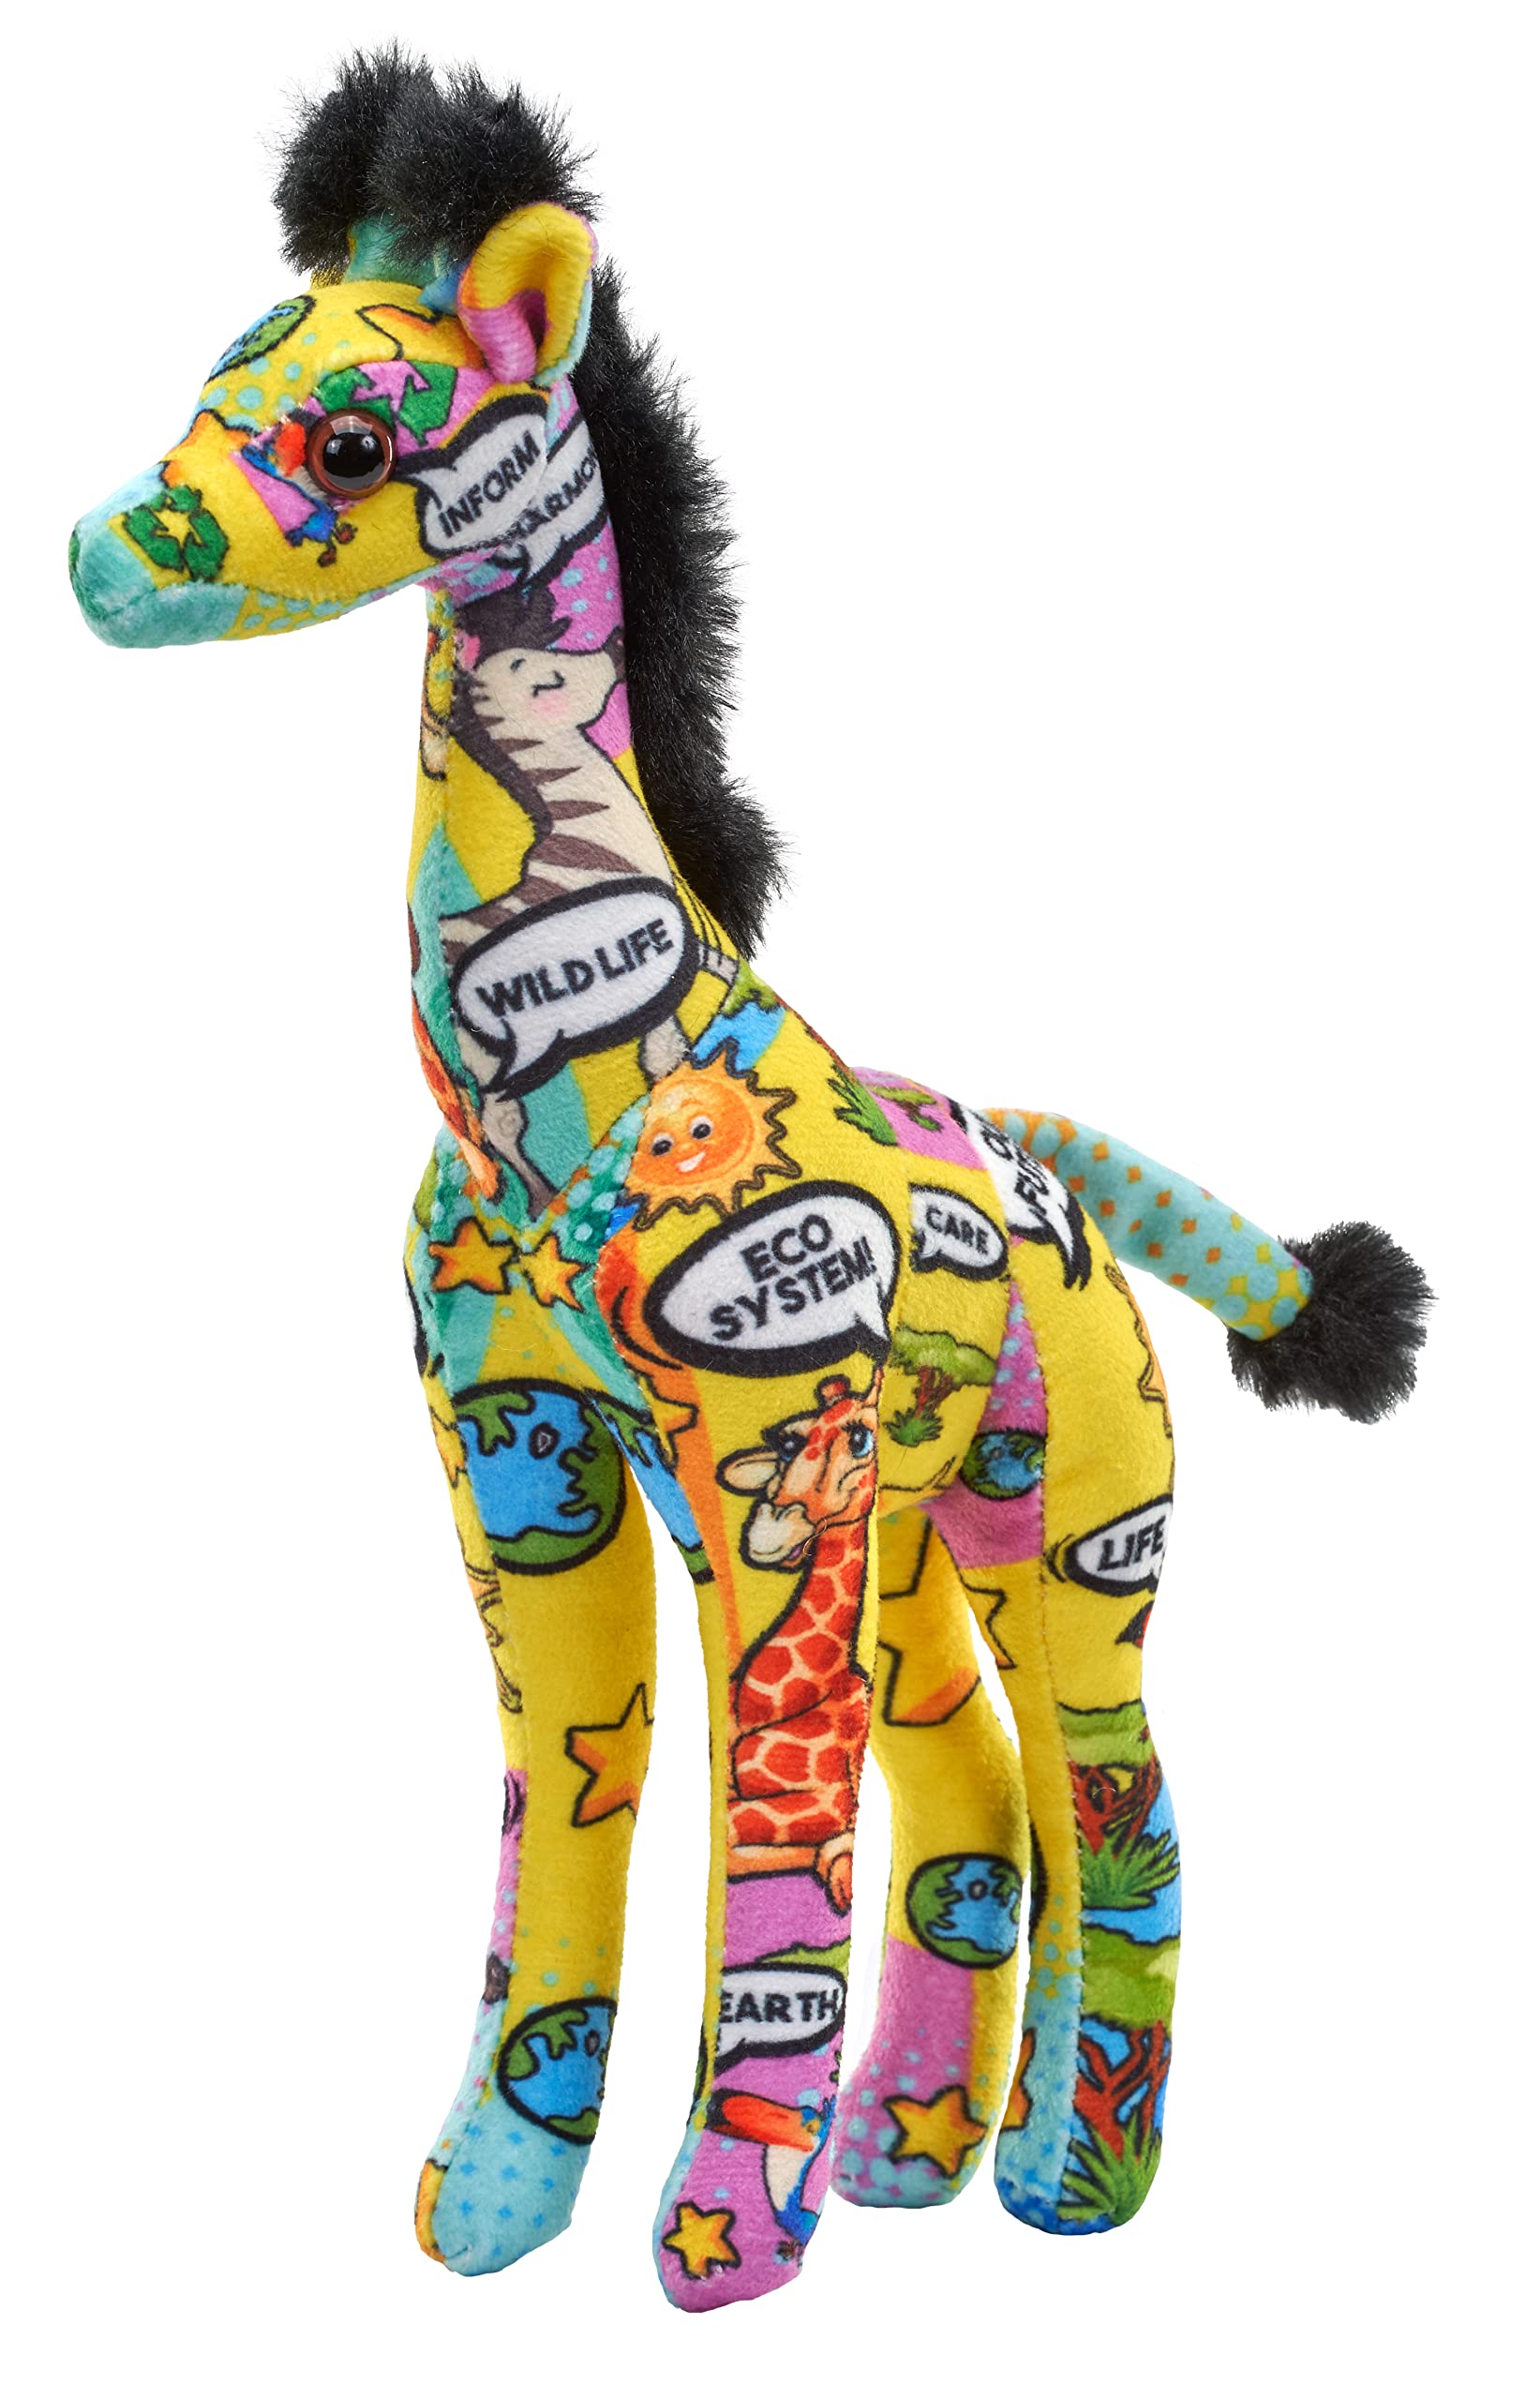 WILD REPUBLIC Message from The Planet Mini, Giraffe, Stuffed Animal, 5 inches, Gift for Kids, Plush Toy, Made from Spun Recycled Water Bottles, Eco Friendly, Child’s Room Decor